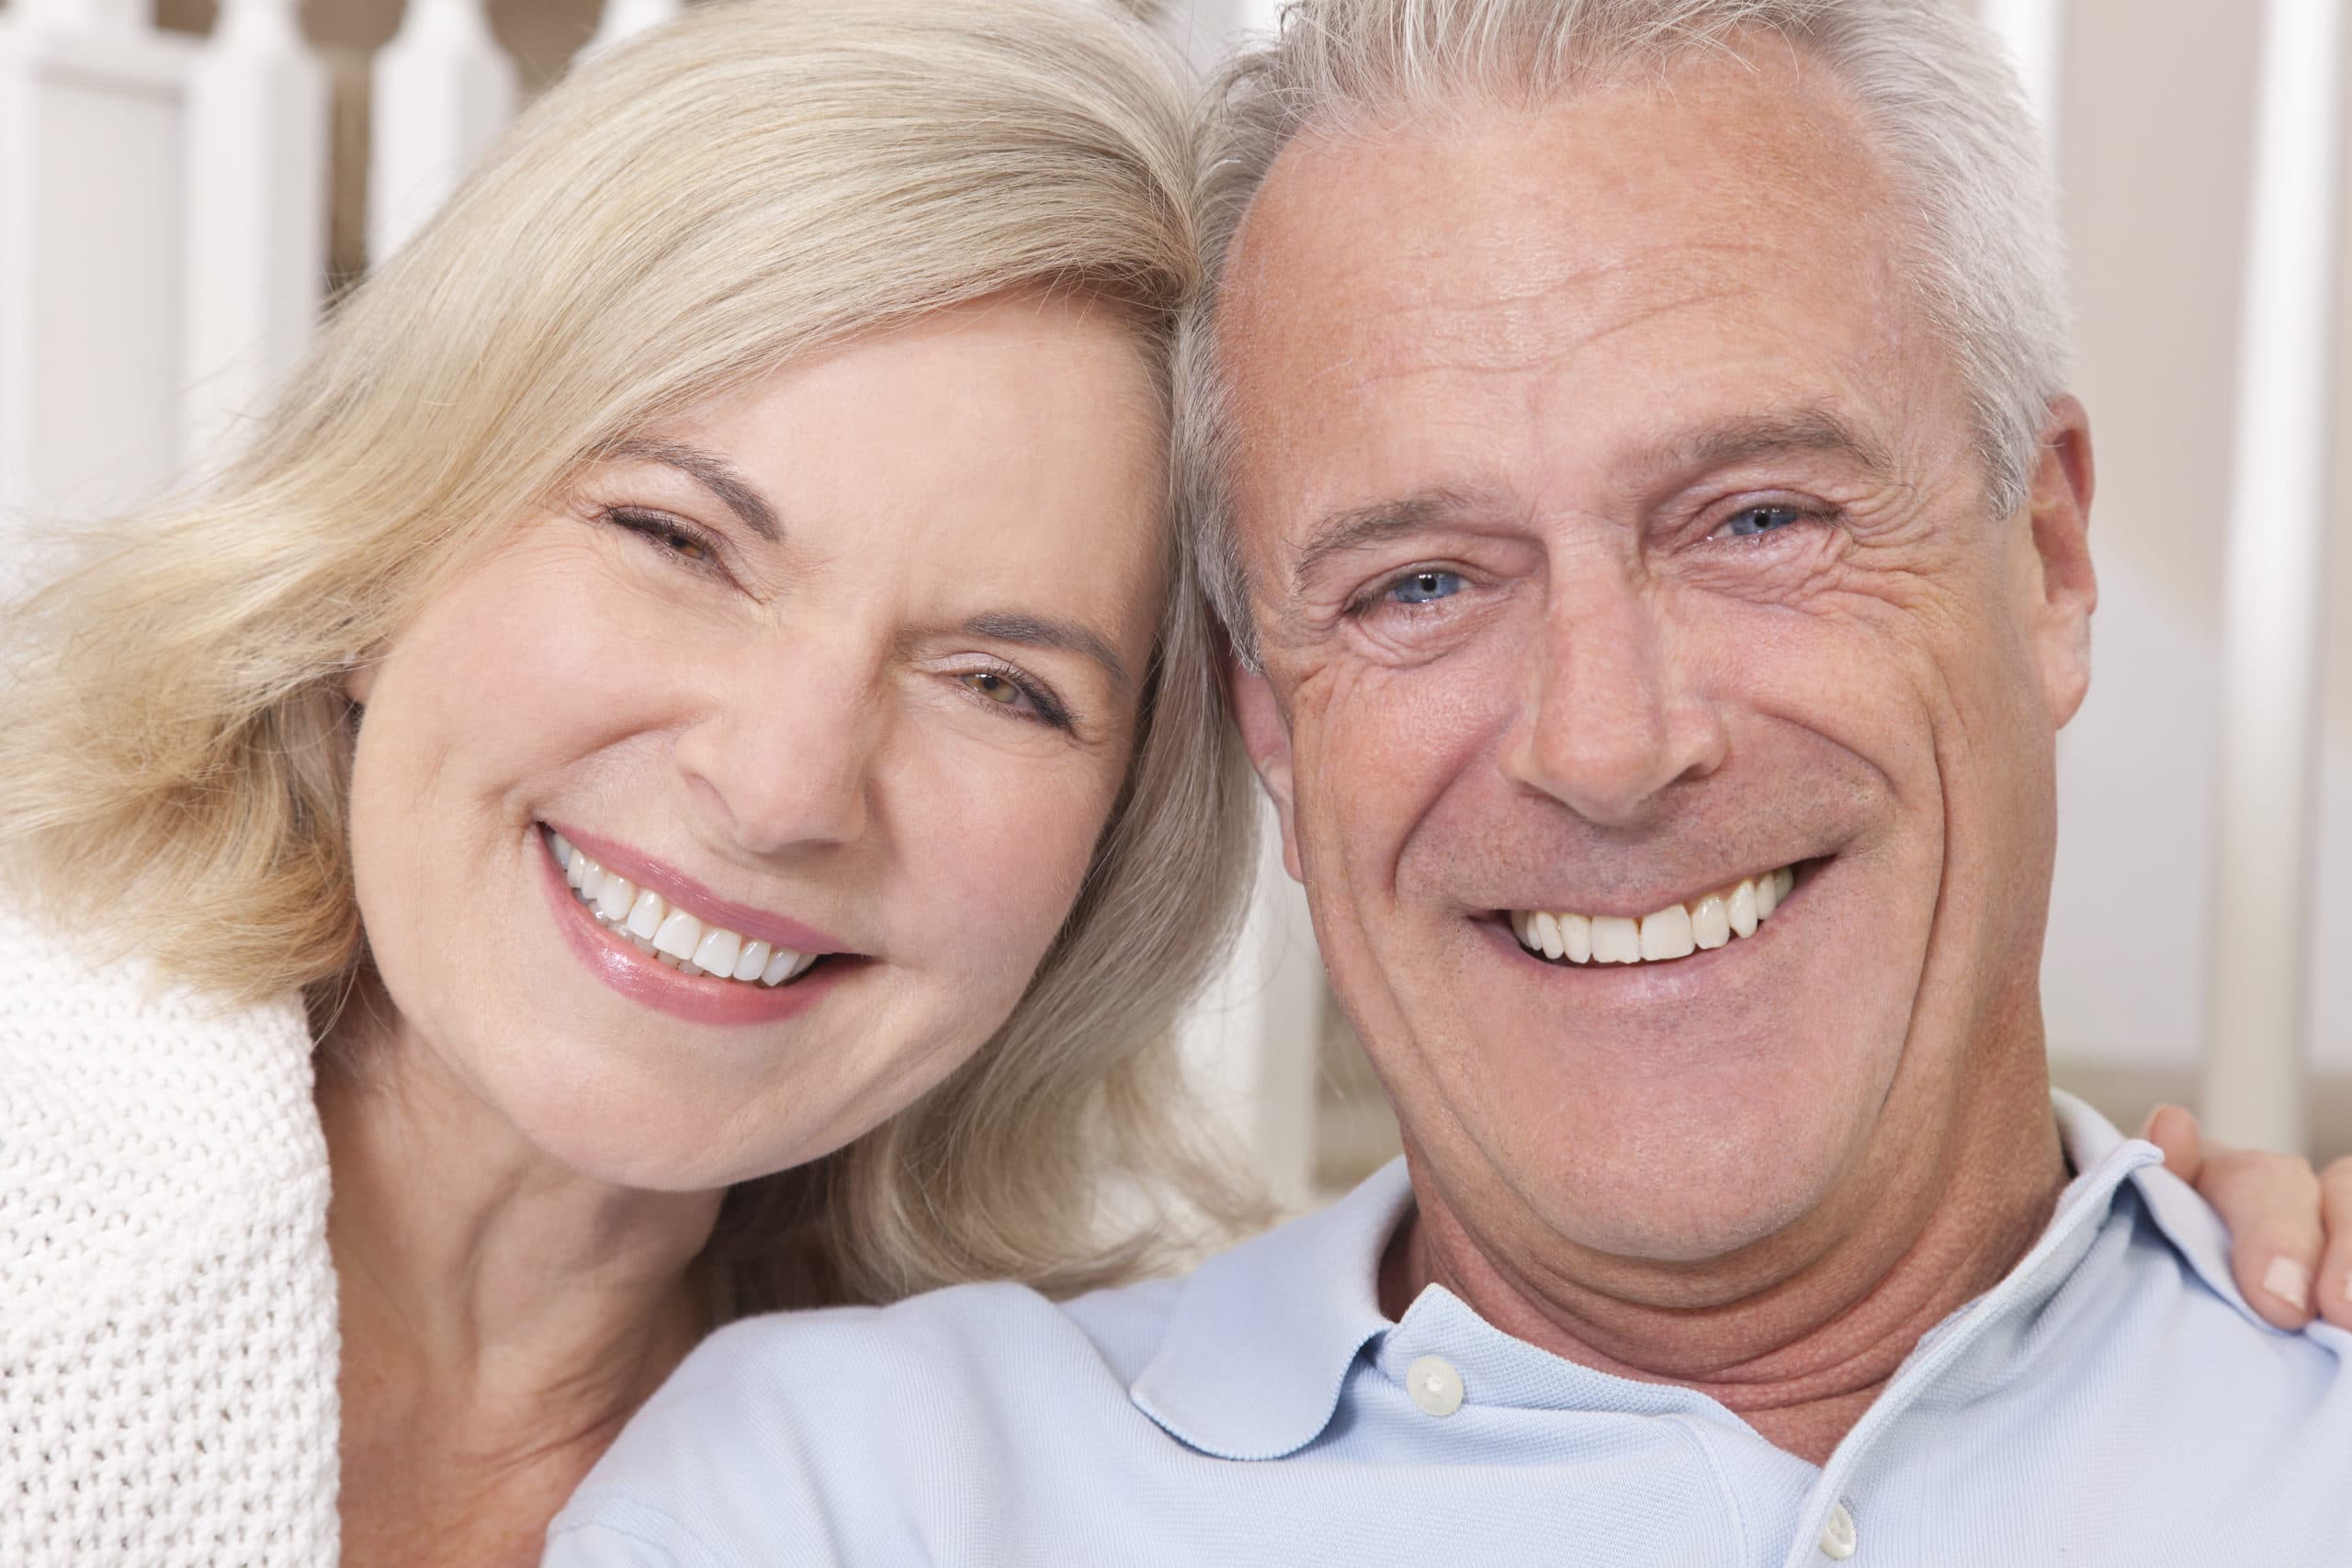 Denture Care – How to Stop Dentures from Falling Out